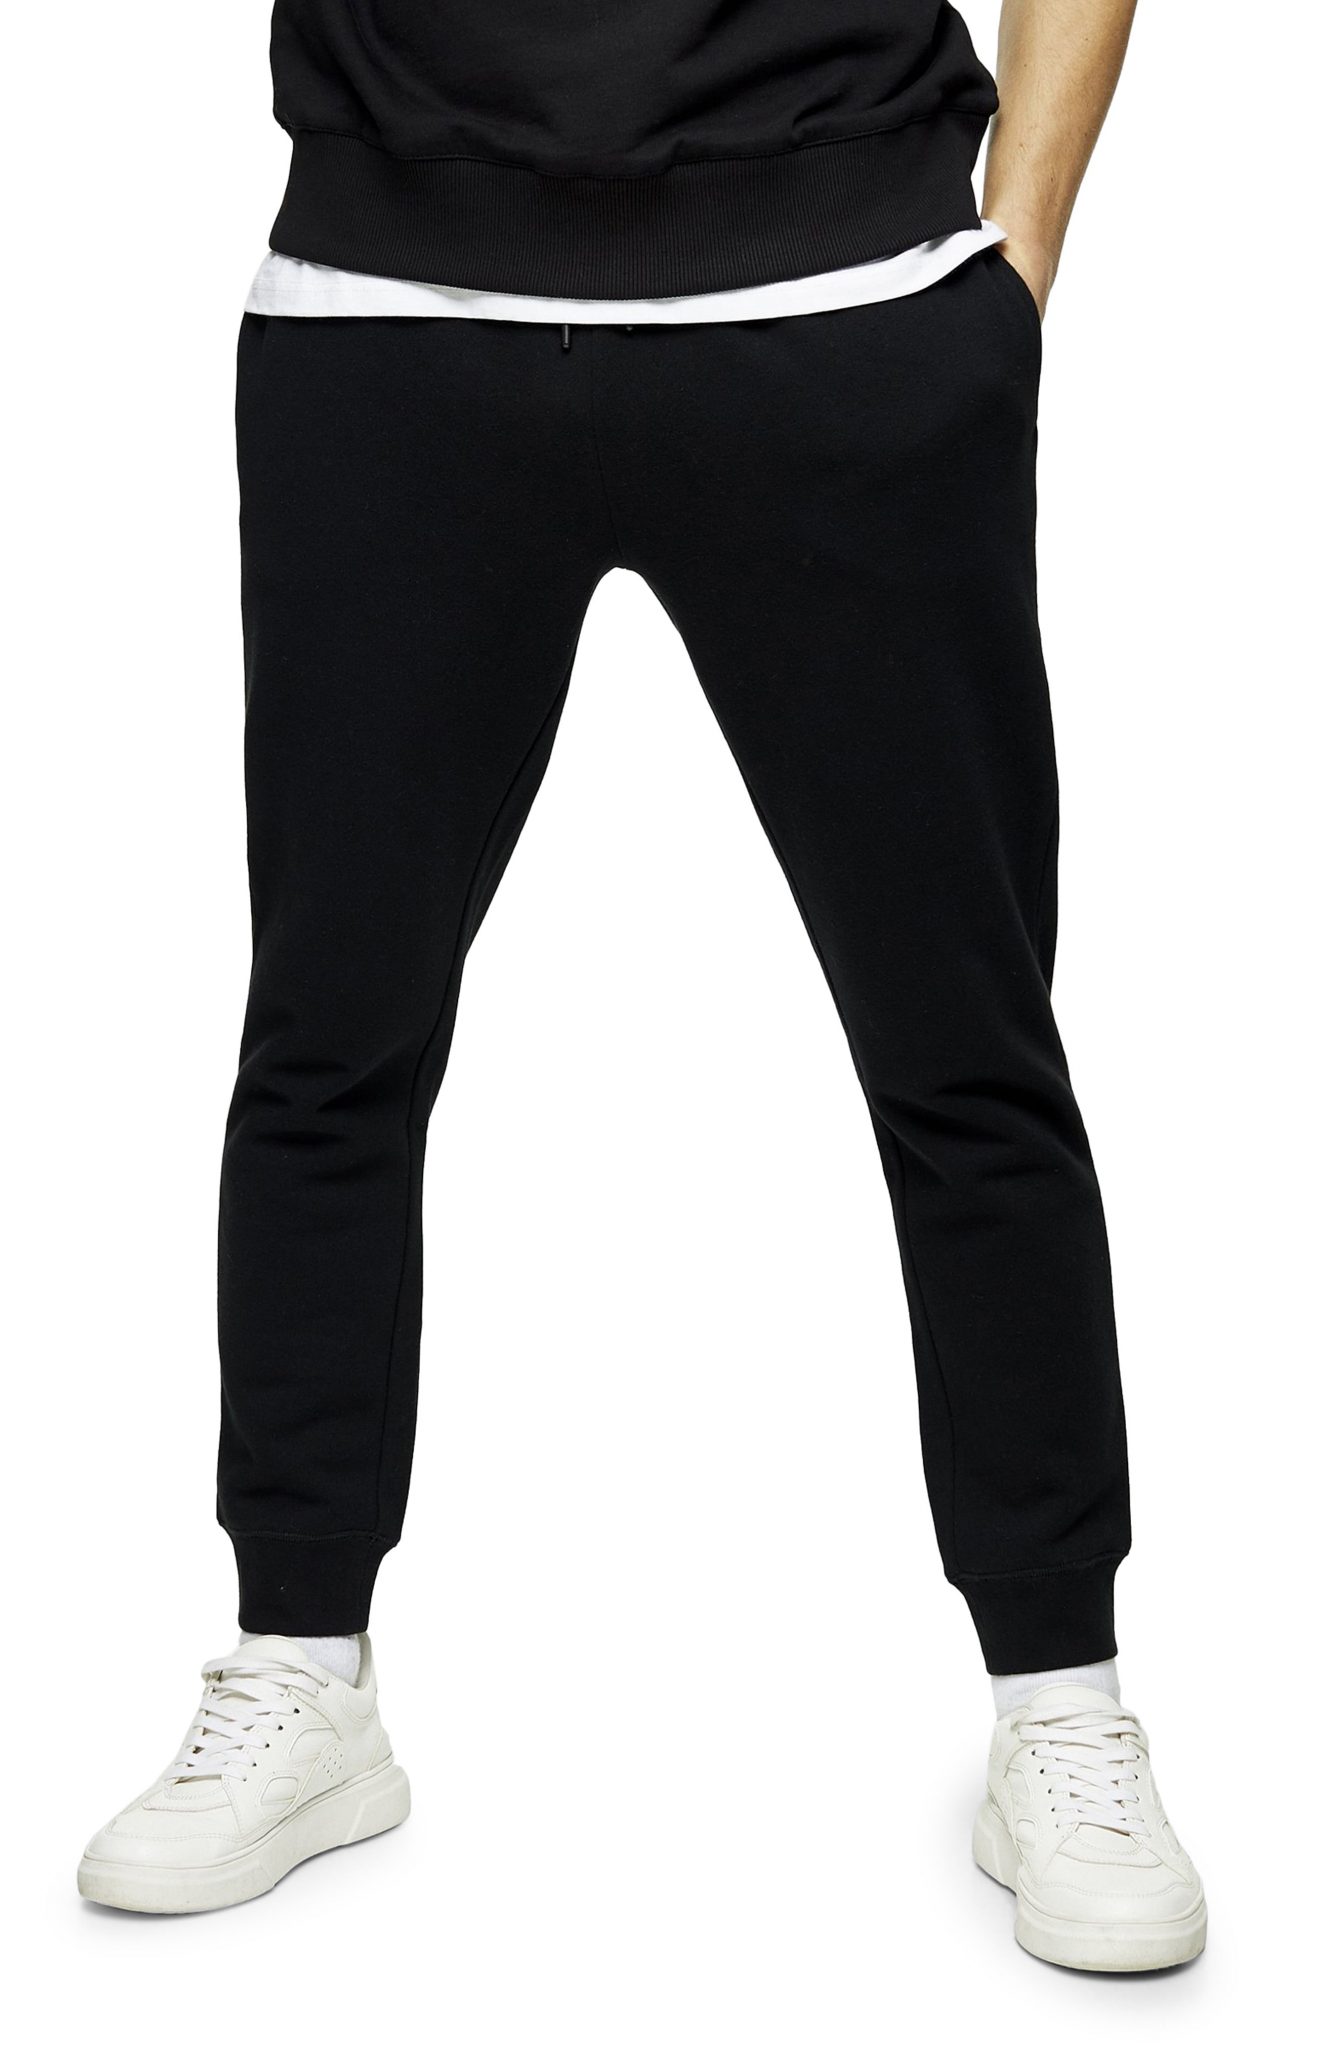 Men’s Topman Dry Handle Skinny Fit Joggers, Size Large - Black | The ...